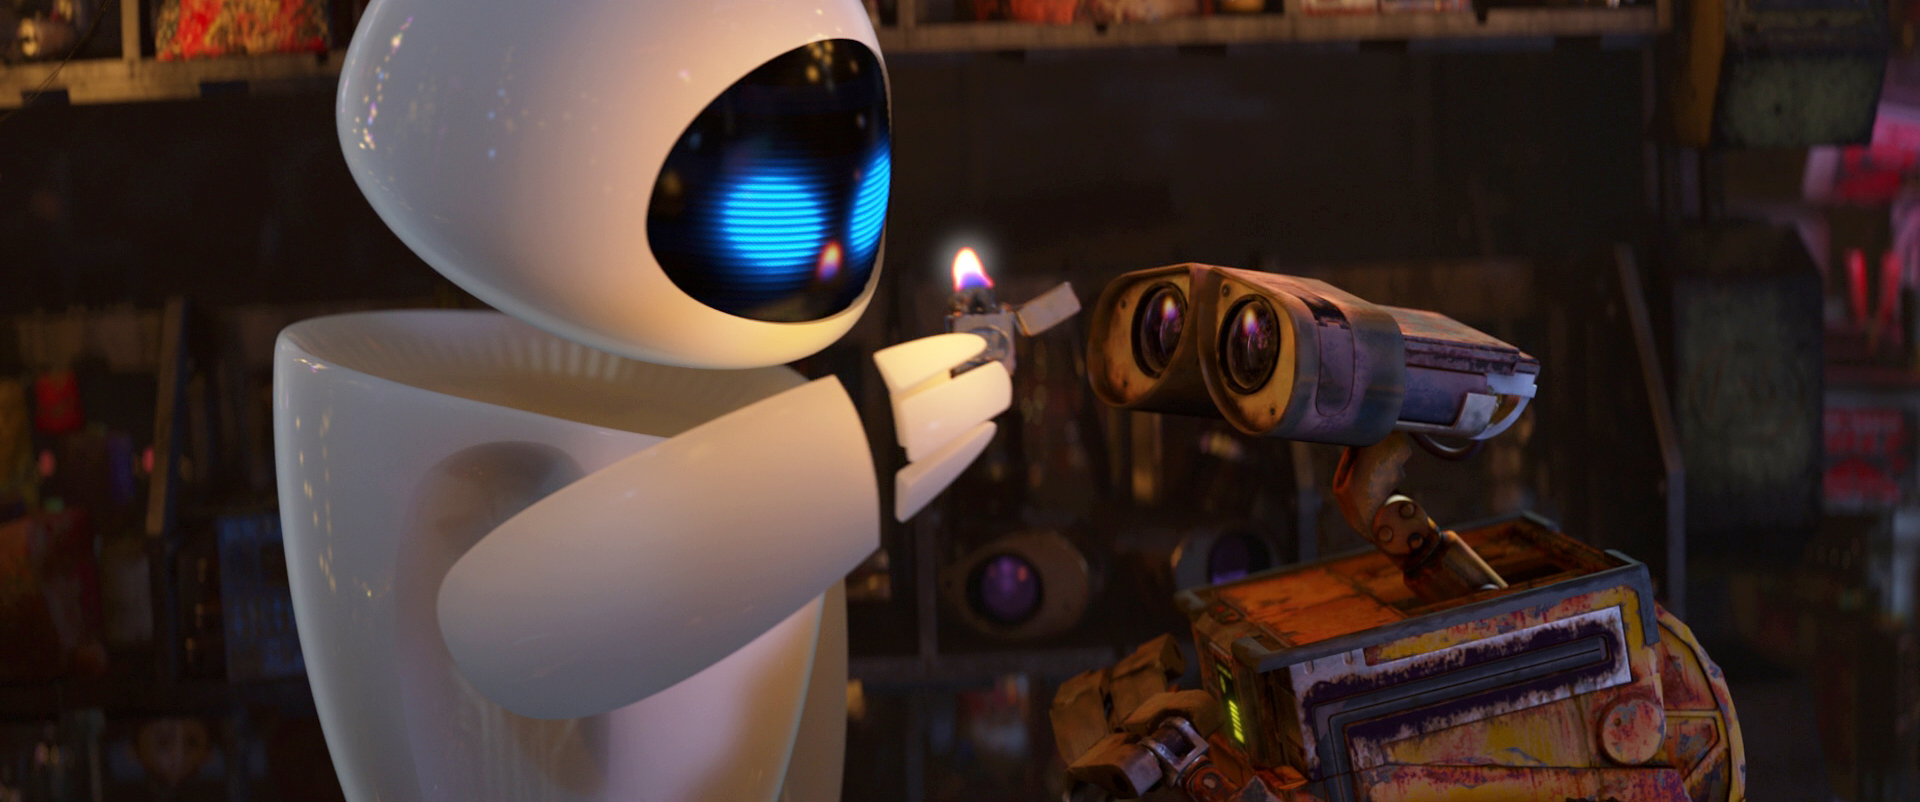 Wall E Review Top 100 Sci Fi Movies